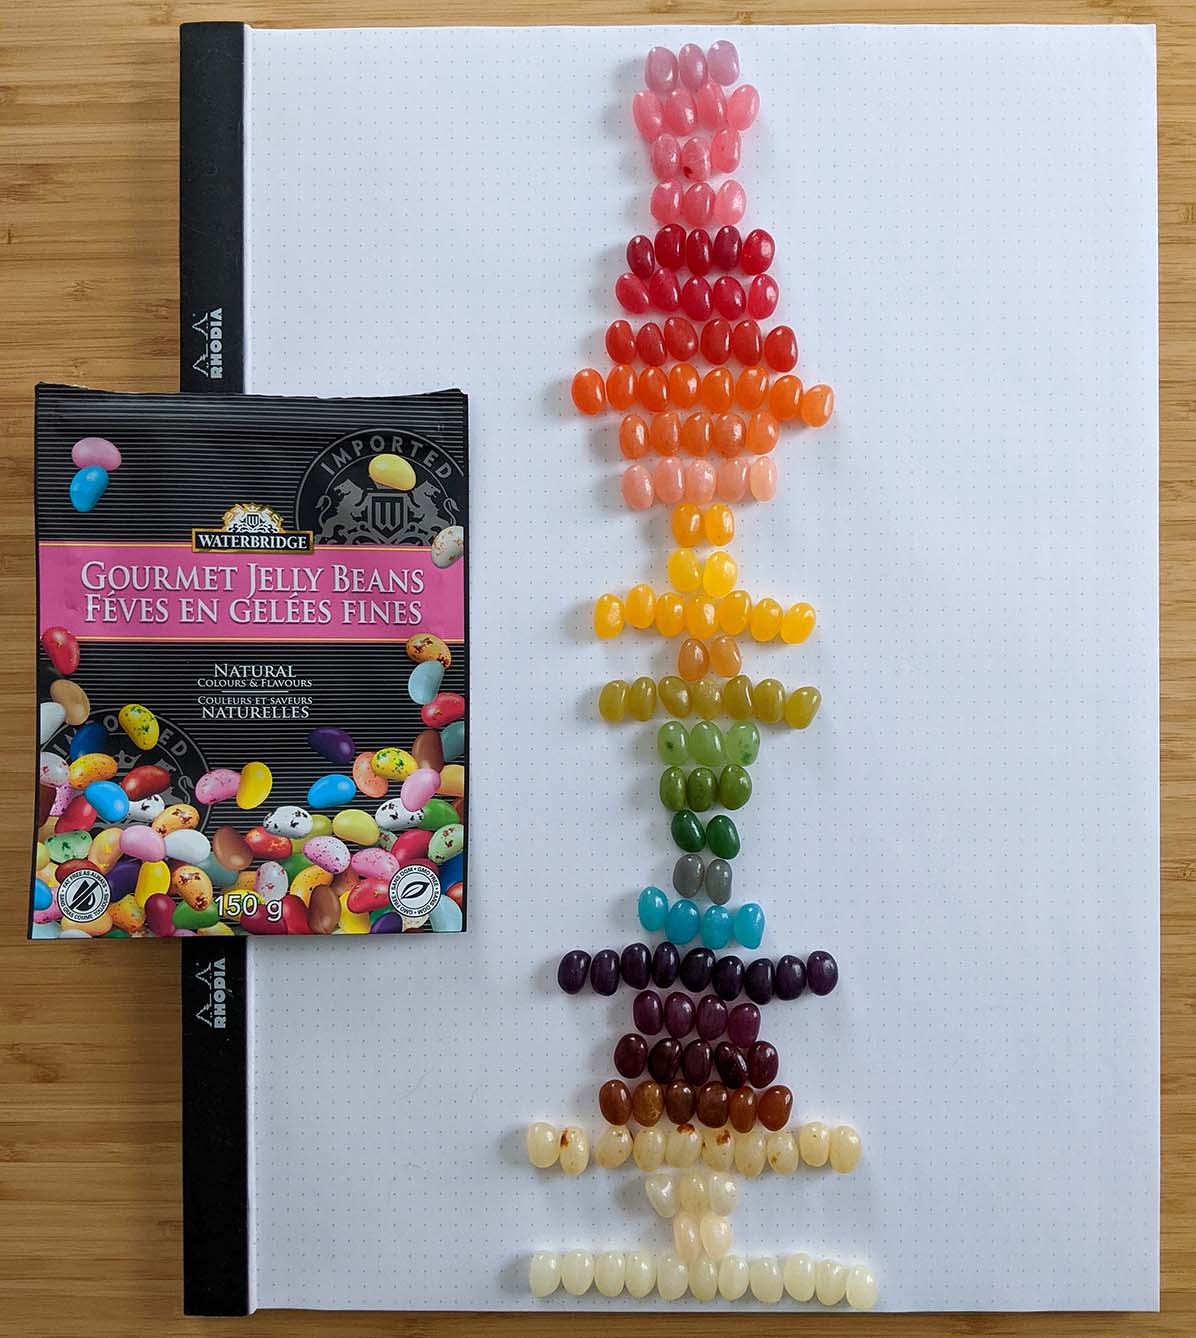 Waterbridge Gourmet Jelly Beans, sorted by flavor